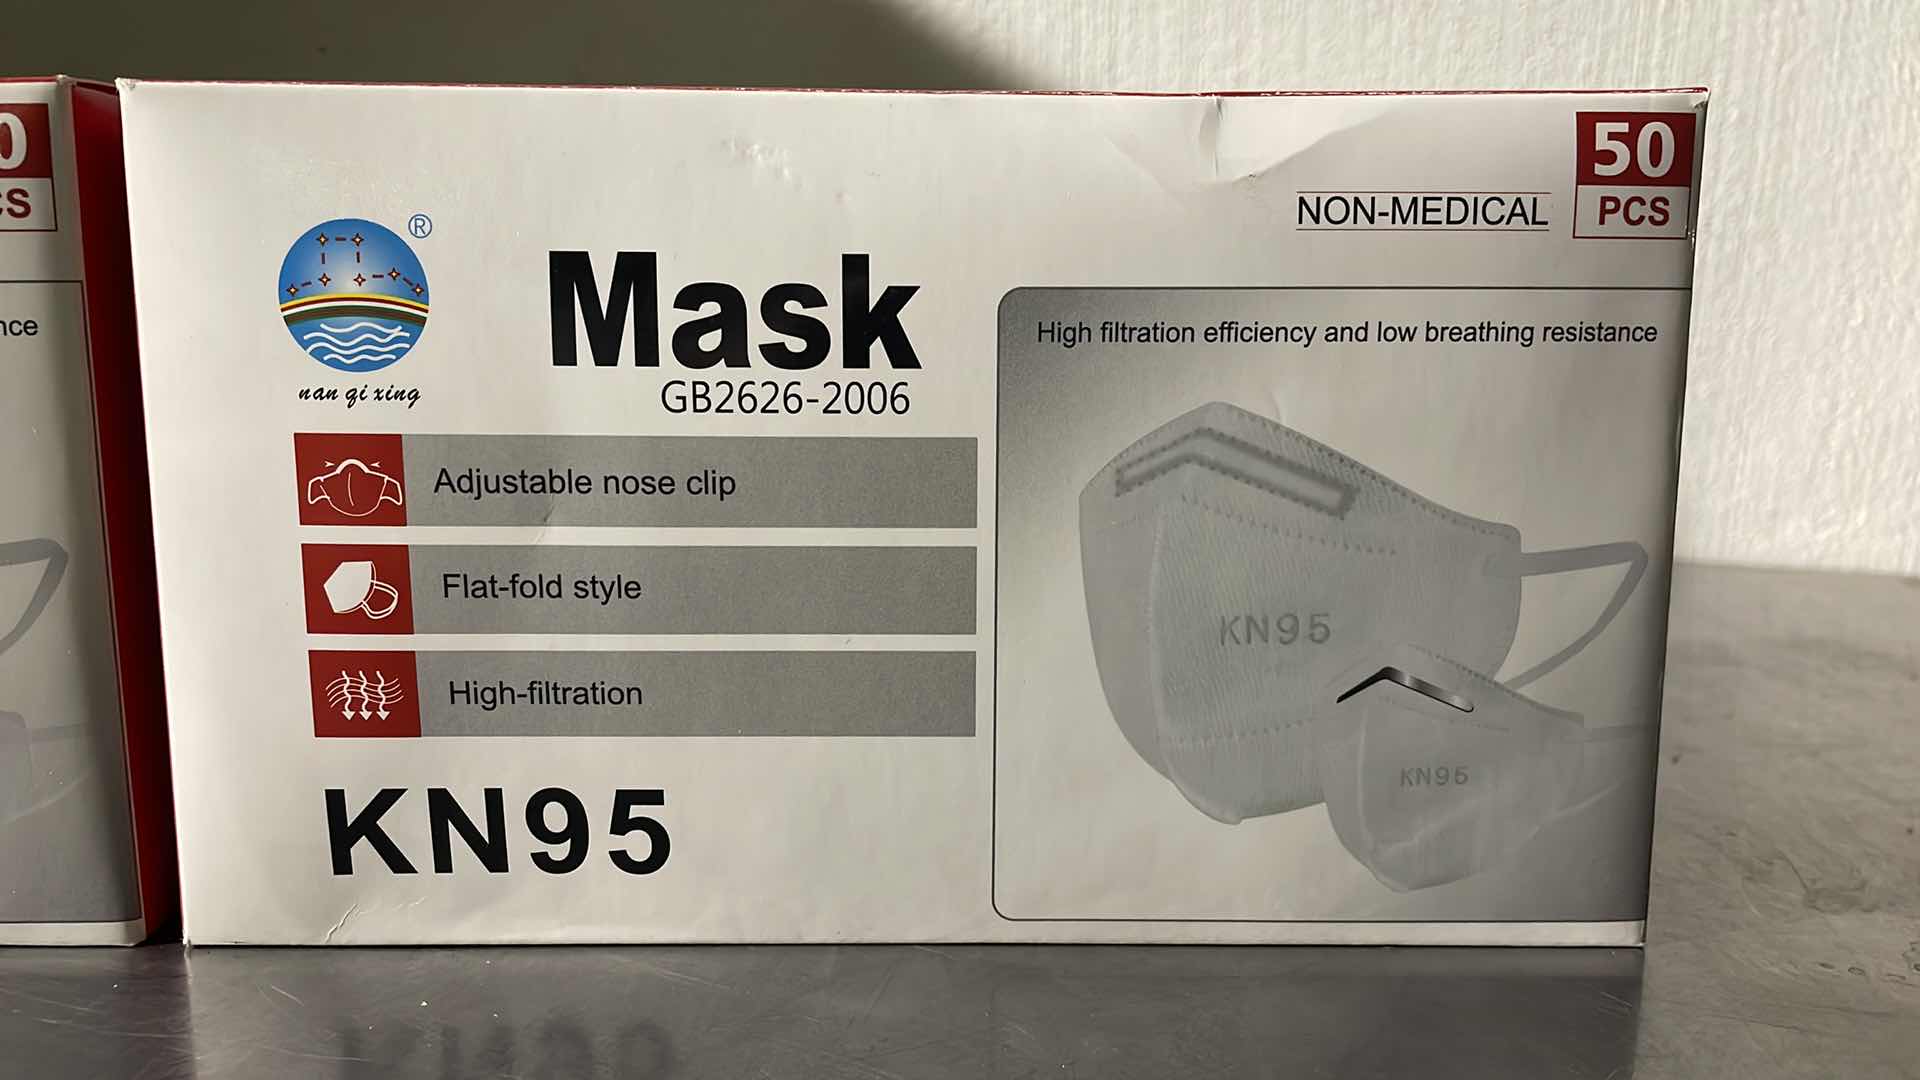 Photo 2 of KN 95 NON MEDICAL MASK (100)